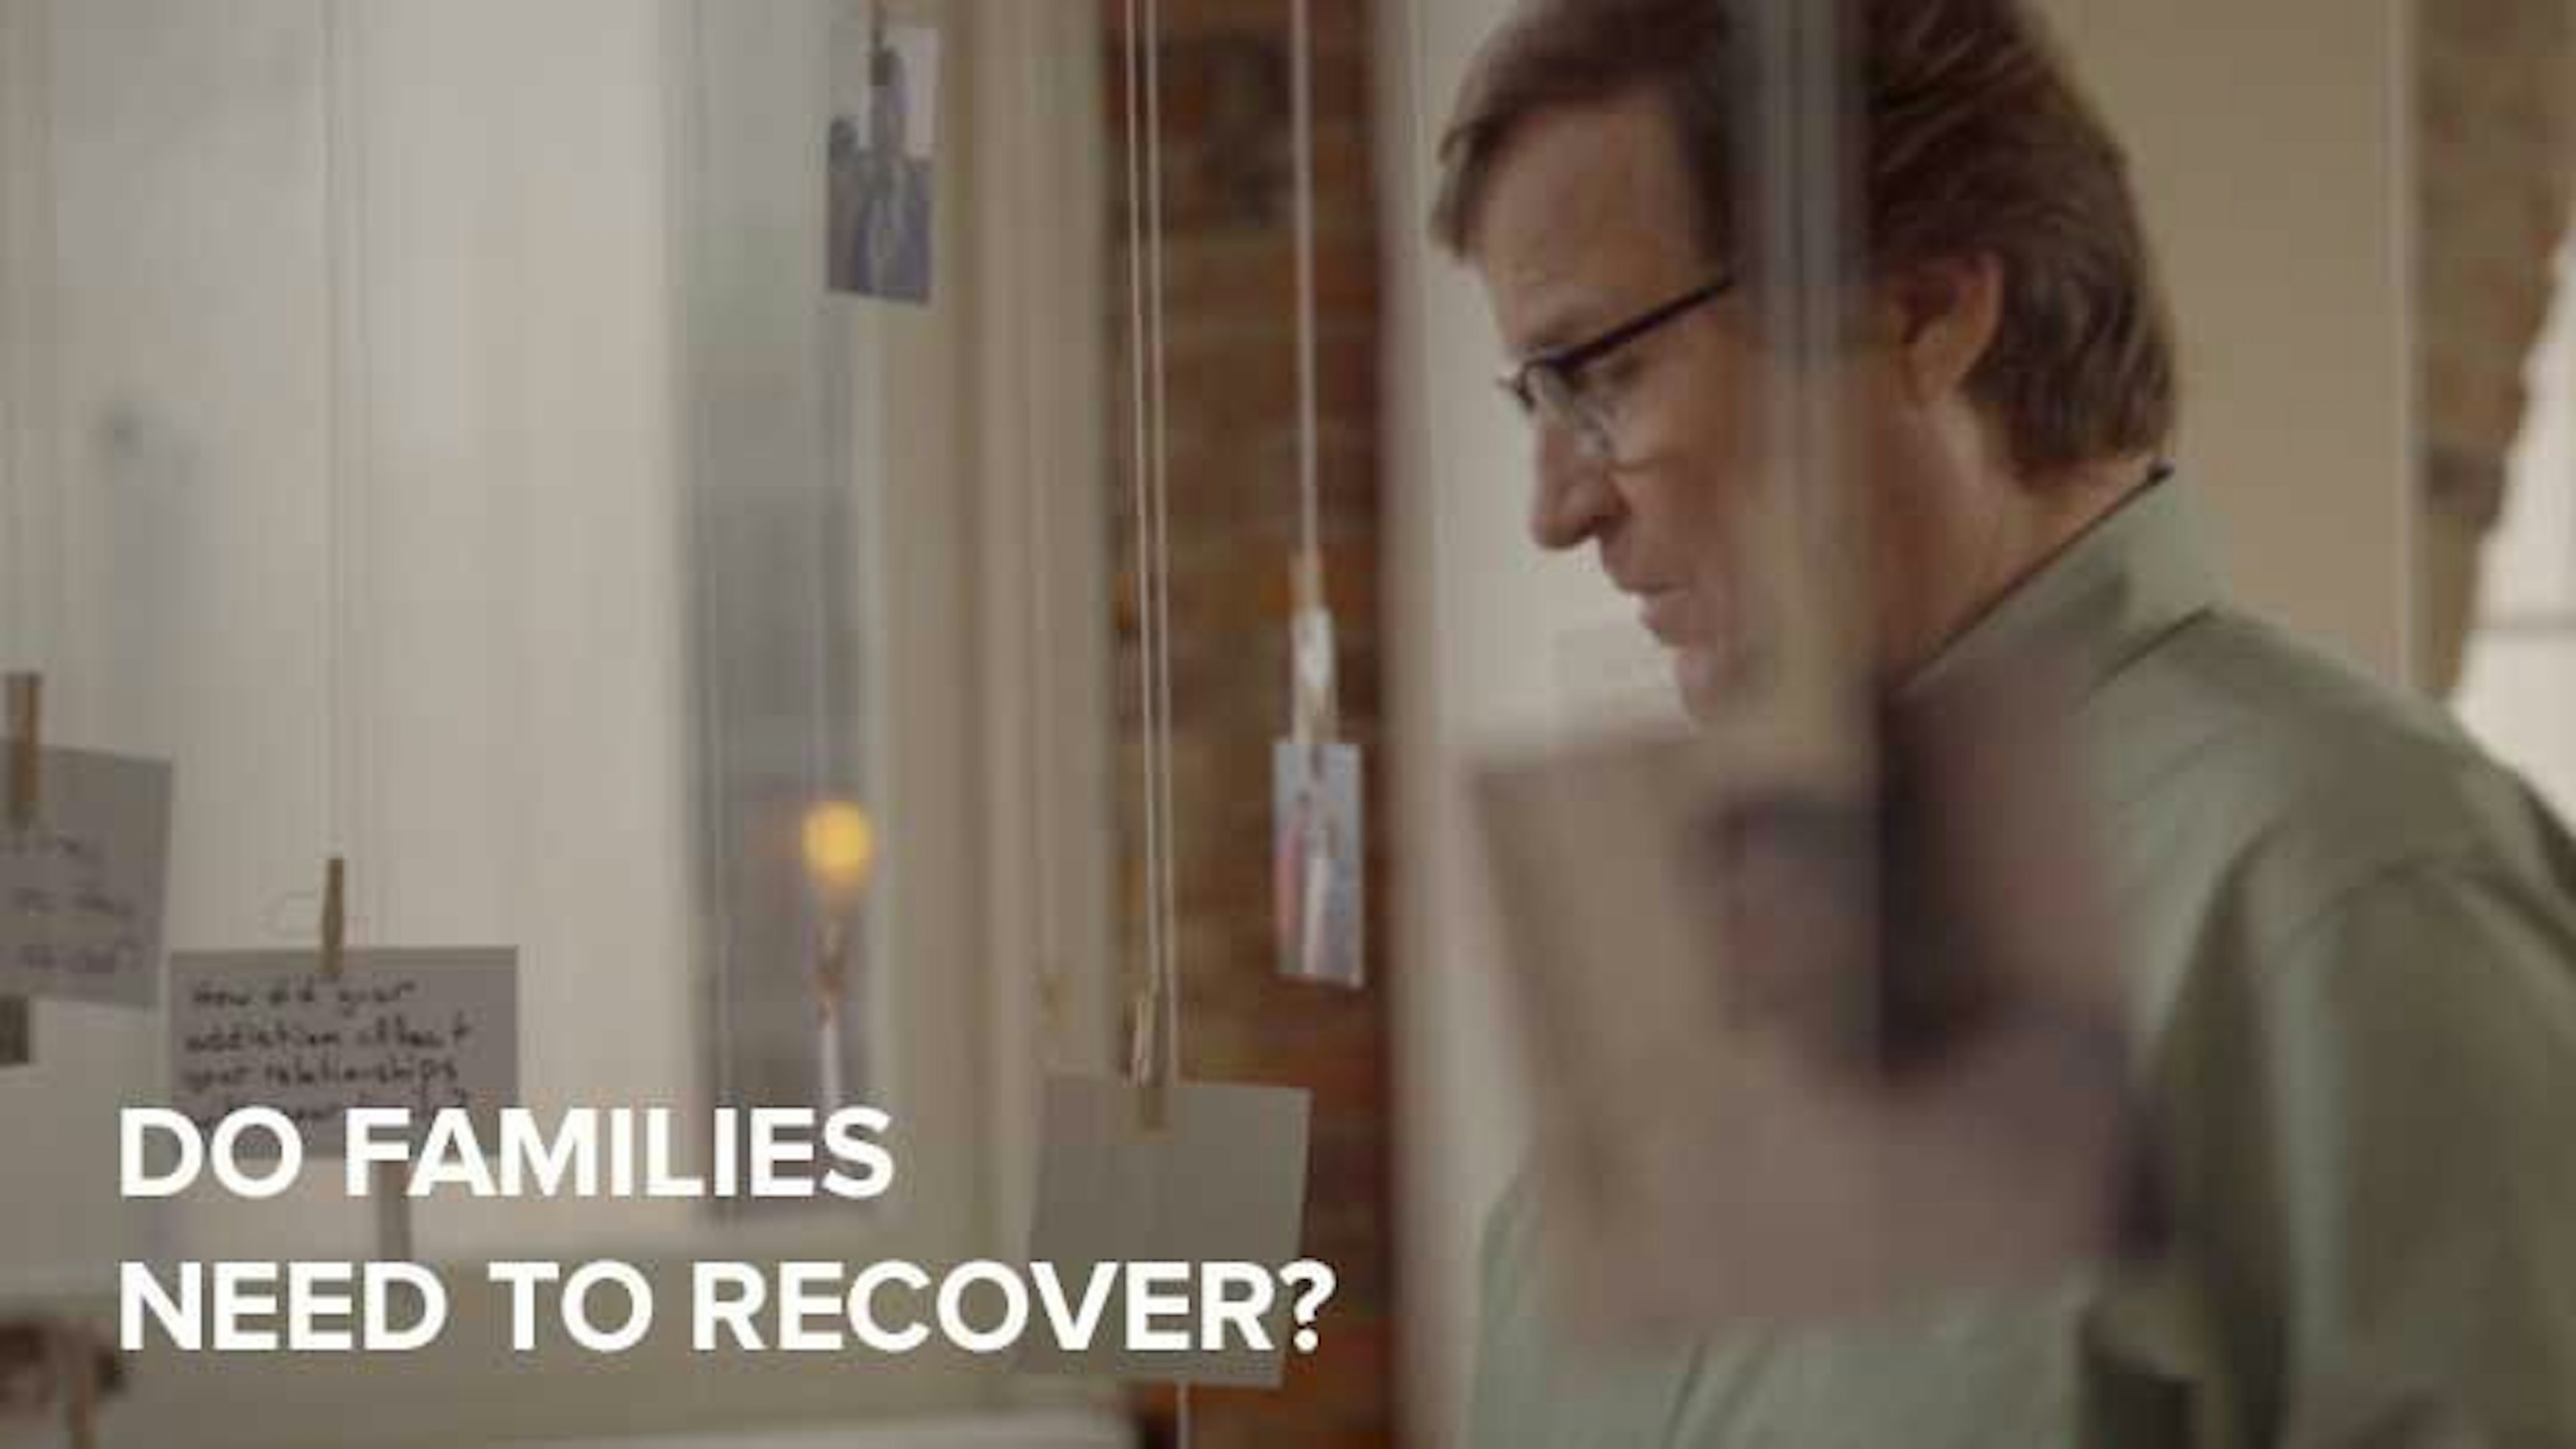 Do families need to recover?